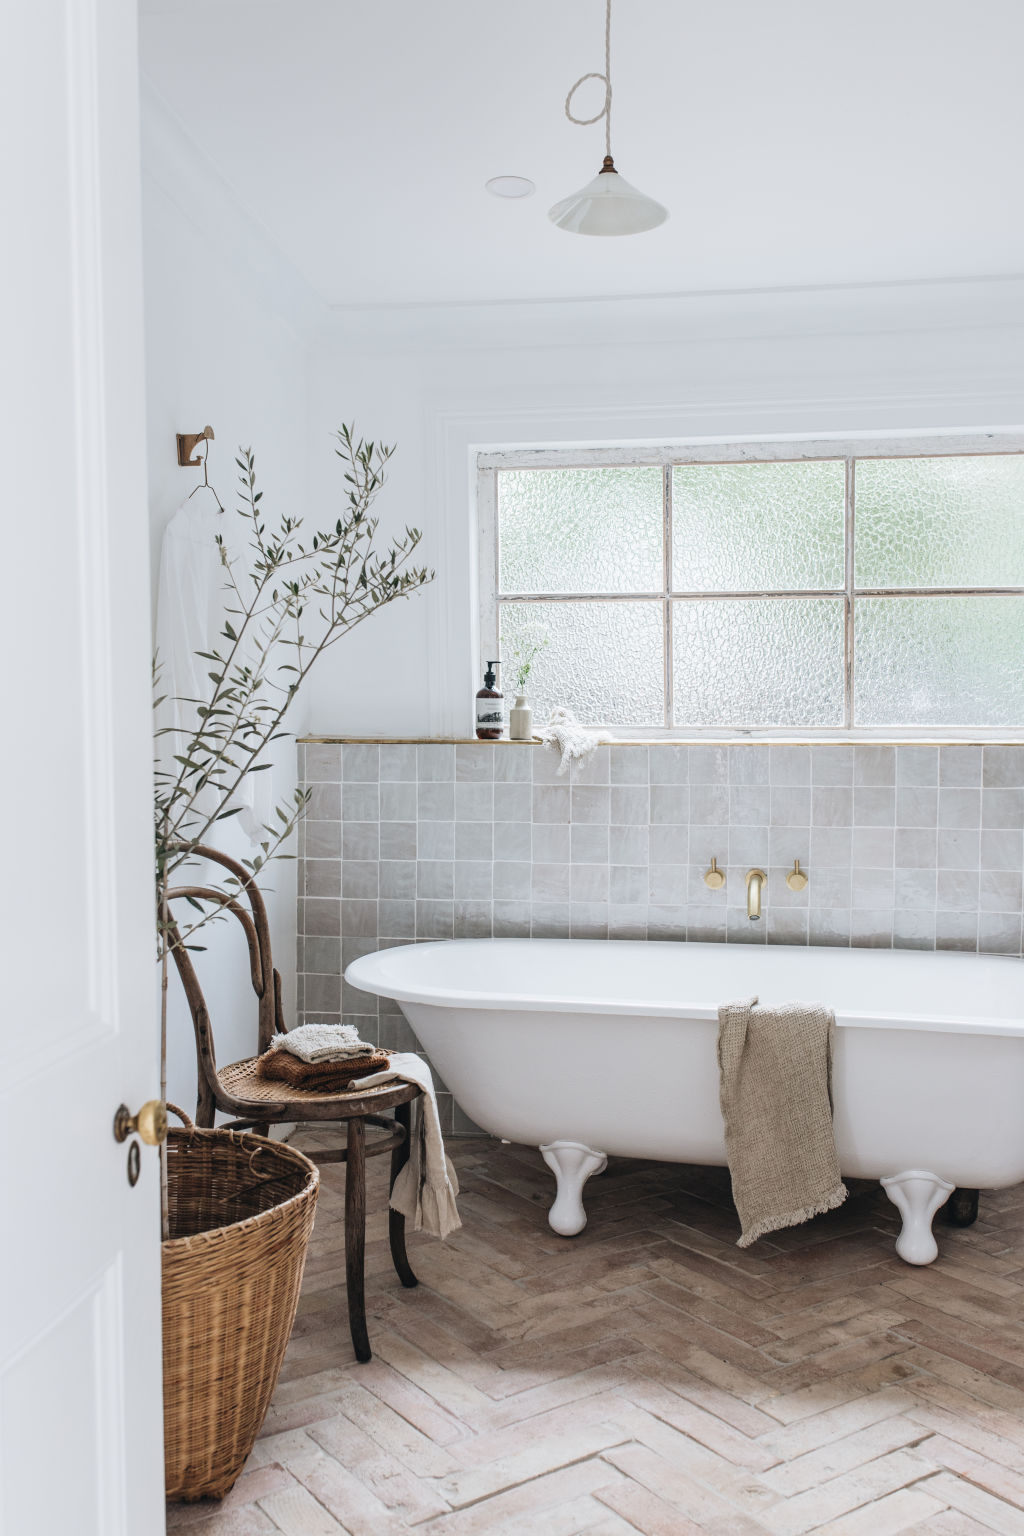 'We knew that the restoration would bring out its best qualities, such as the original floorboards and windows,' says Aldridge. Photo: Abbie Melle Photography